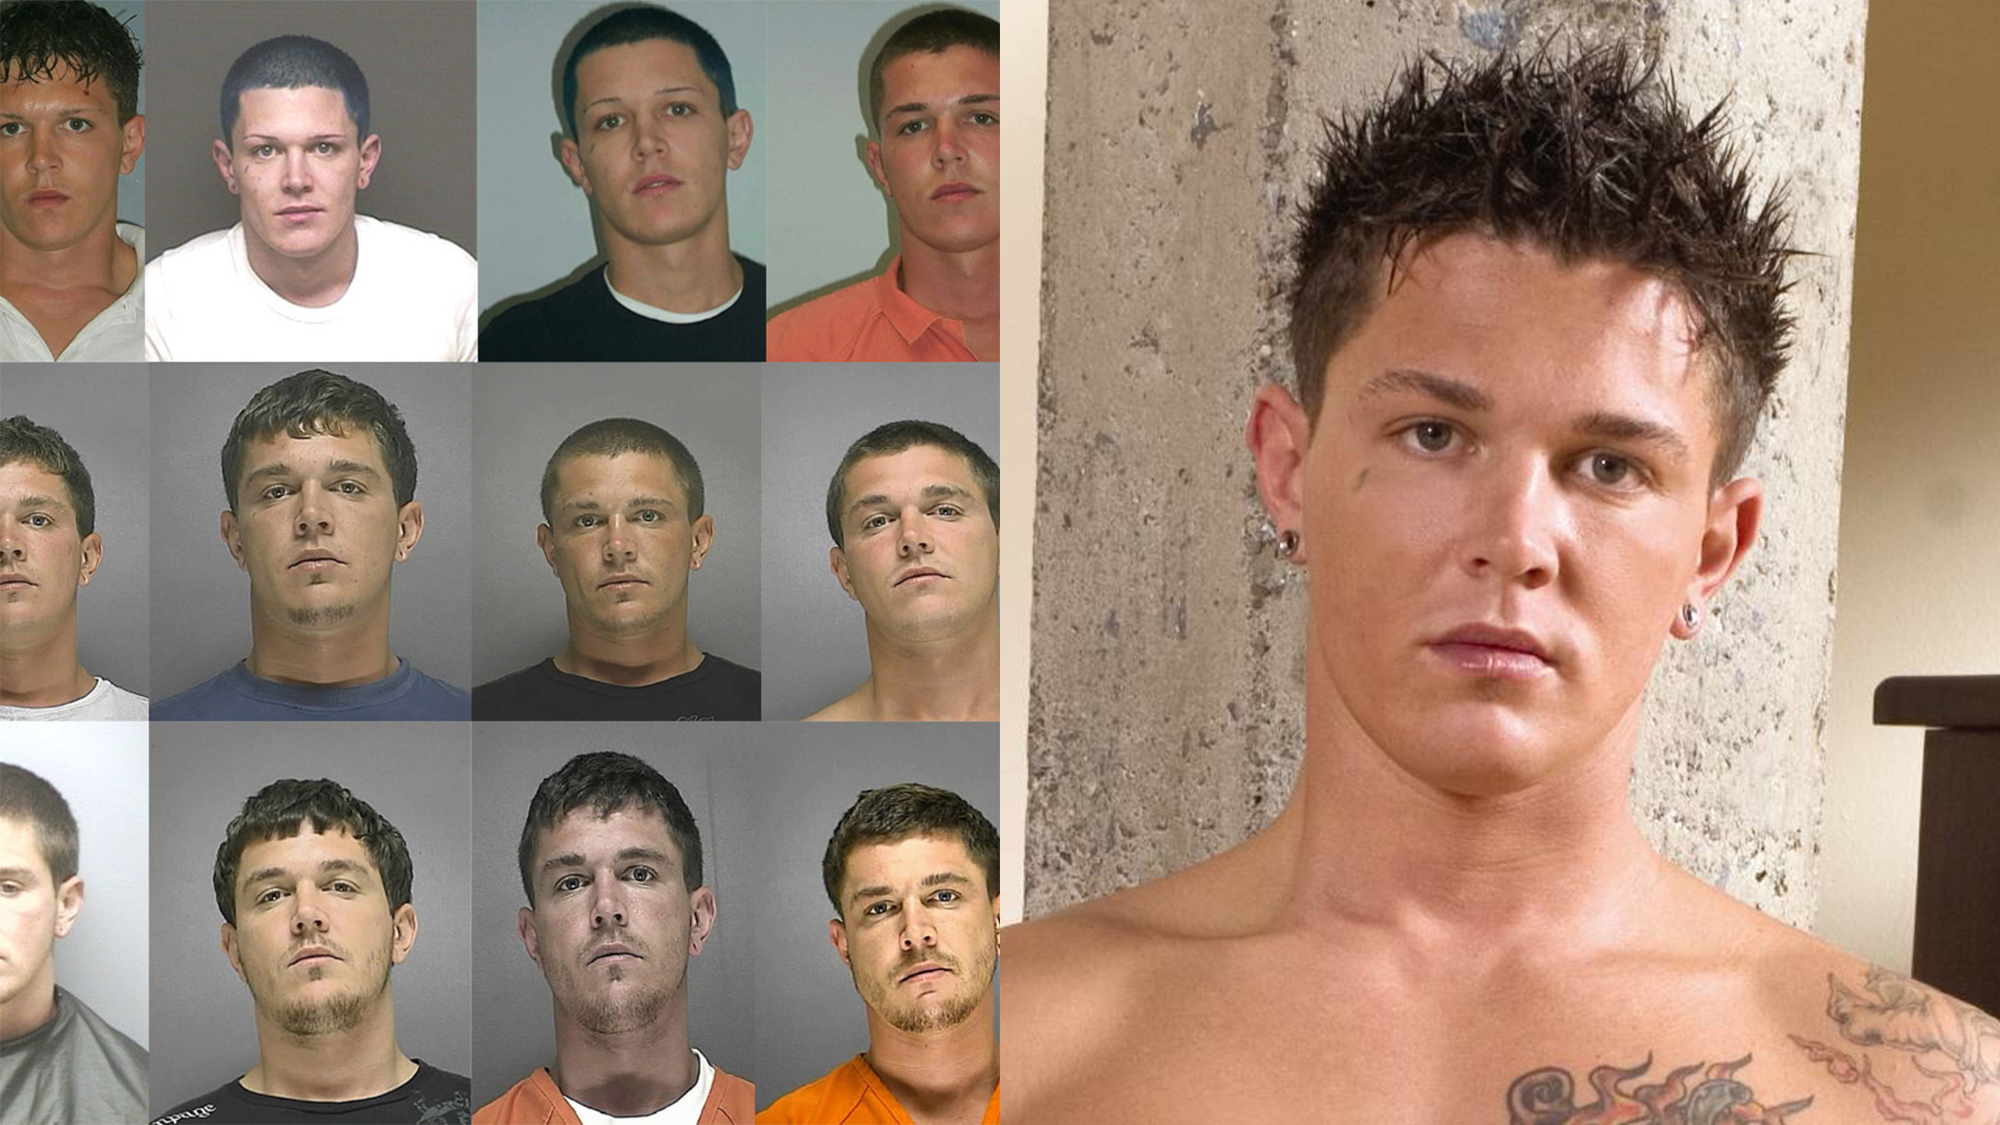 Youngest Gay Porn Star - Gay Porn Star & Convicted Sex Offender Sebastian Young Shot Dead By Police  - TheSword.com